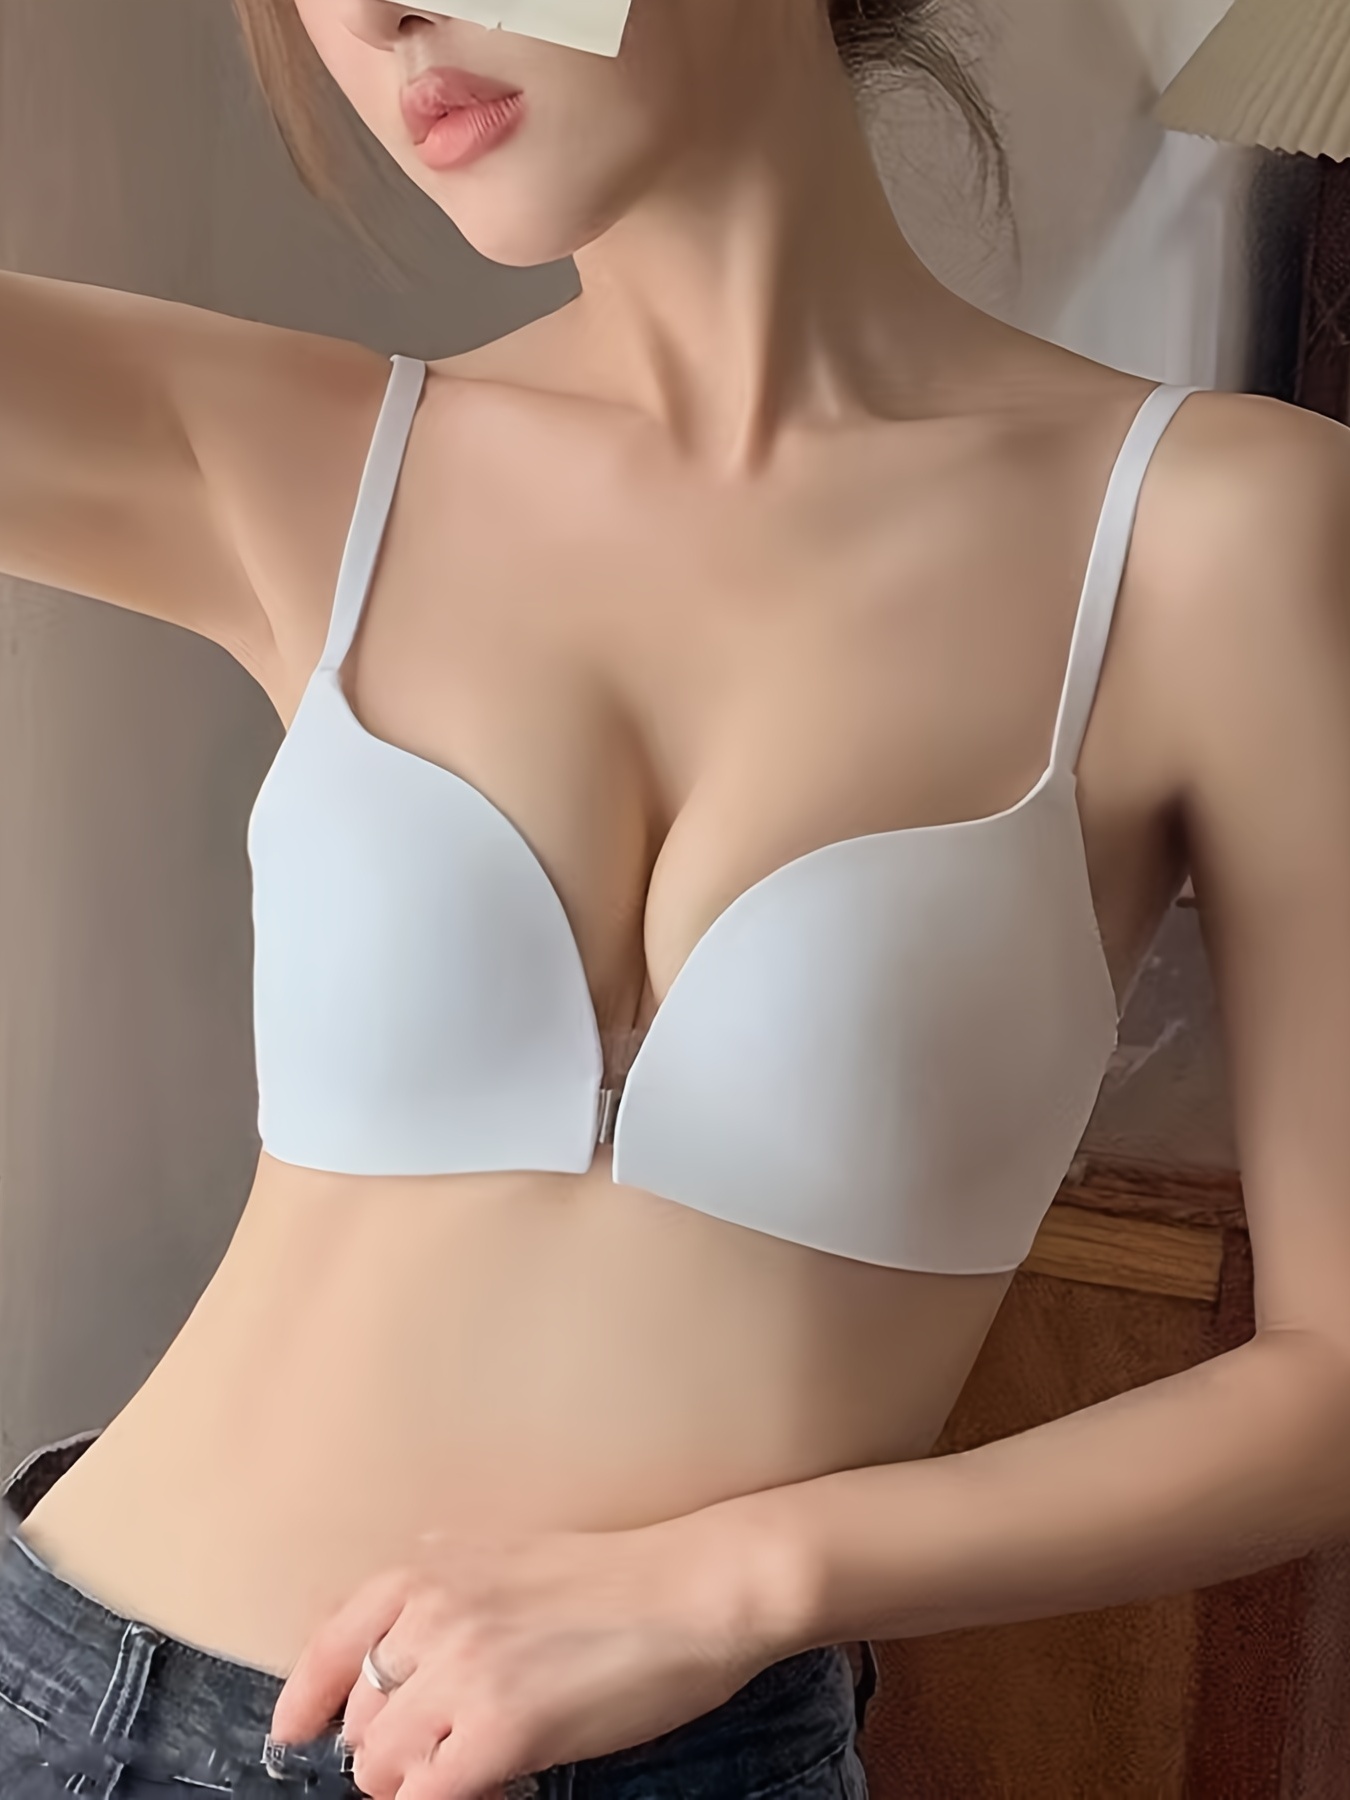 JGTDBPO Front Buckle Bra For Women Push Up Thin Bra Non-Slip Upper Support  Big Chest Show Small Invisible Bra Wedding Party Special Glossy Underwear 